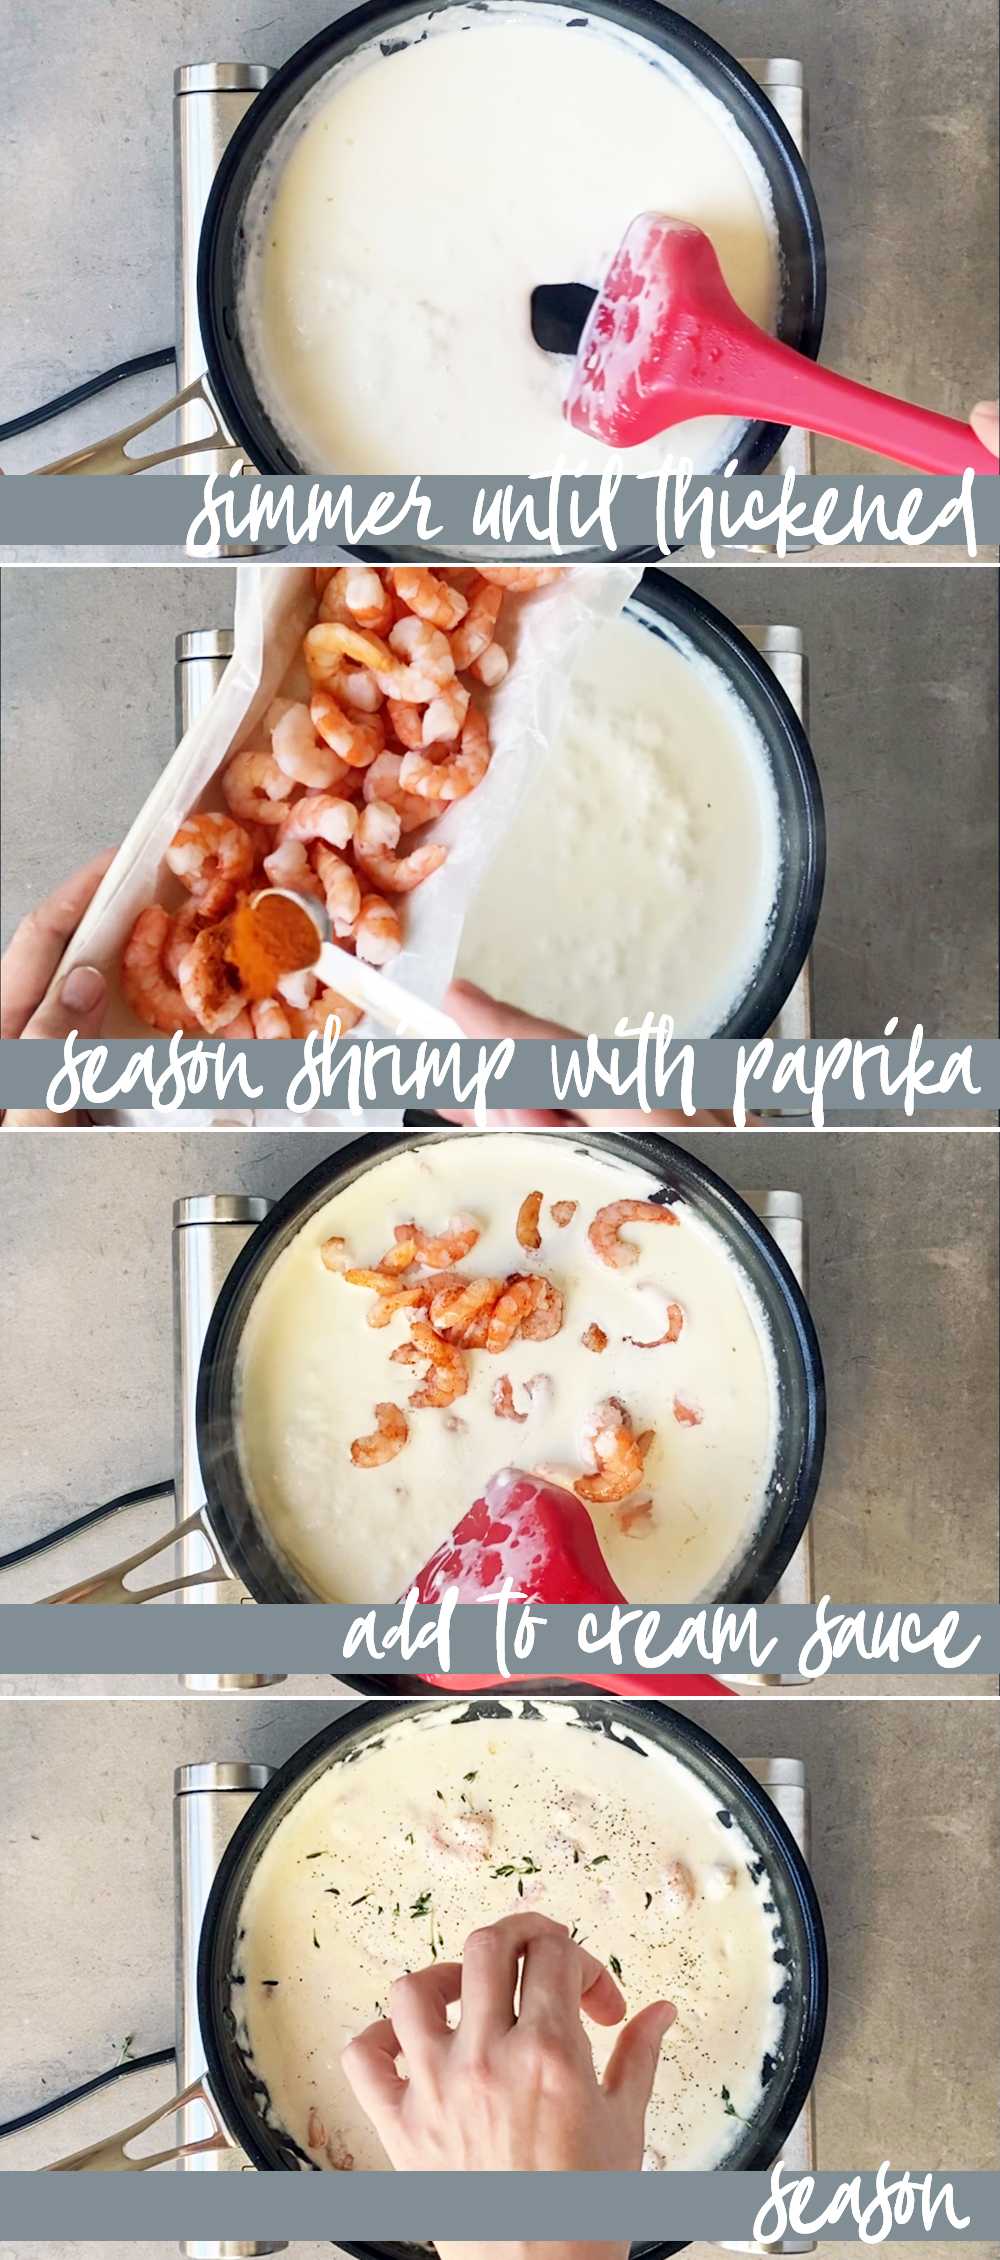 Step by step workflow for cream sauce with shrimp - part 2